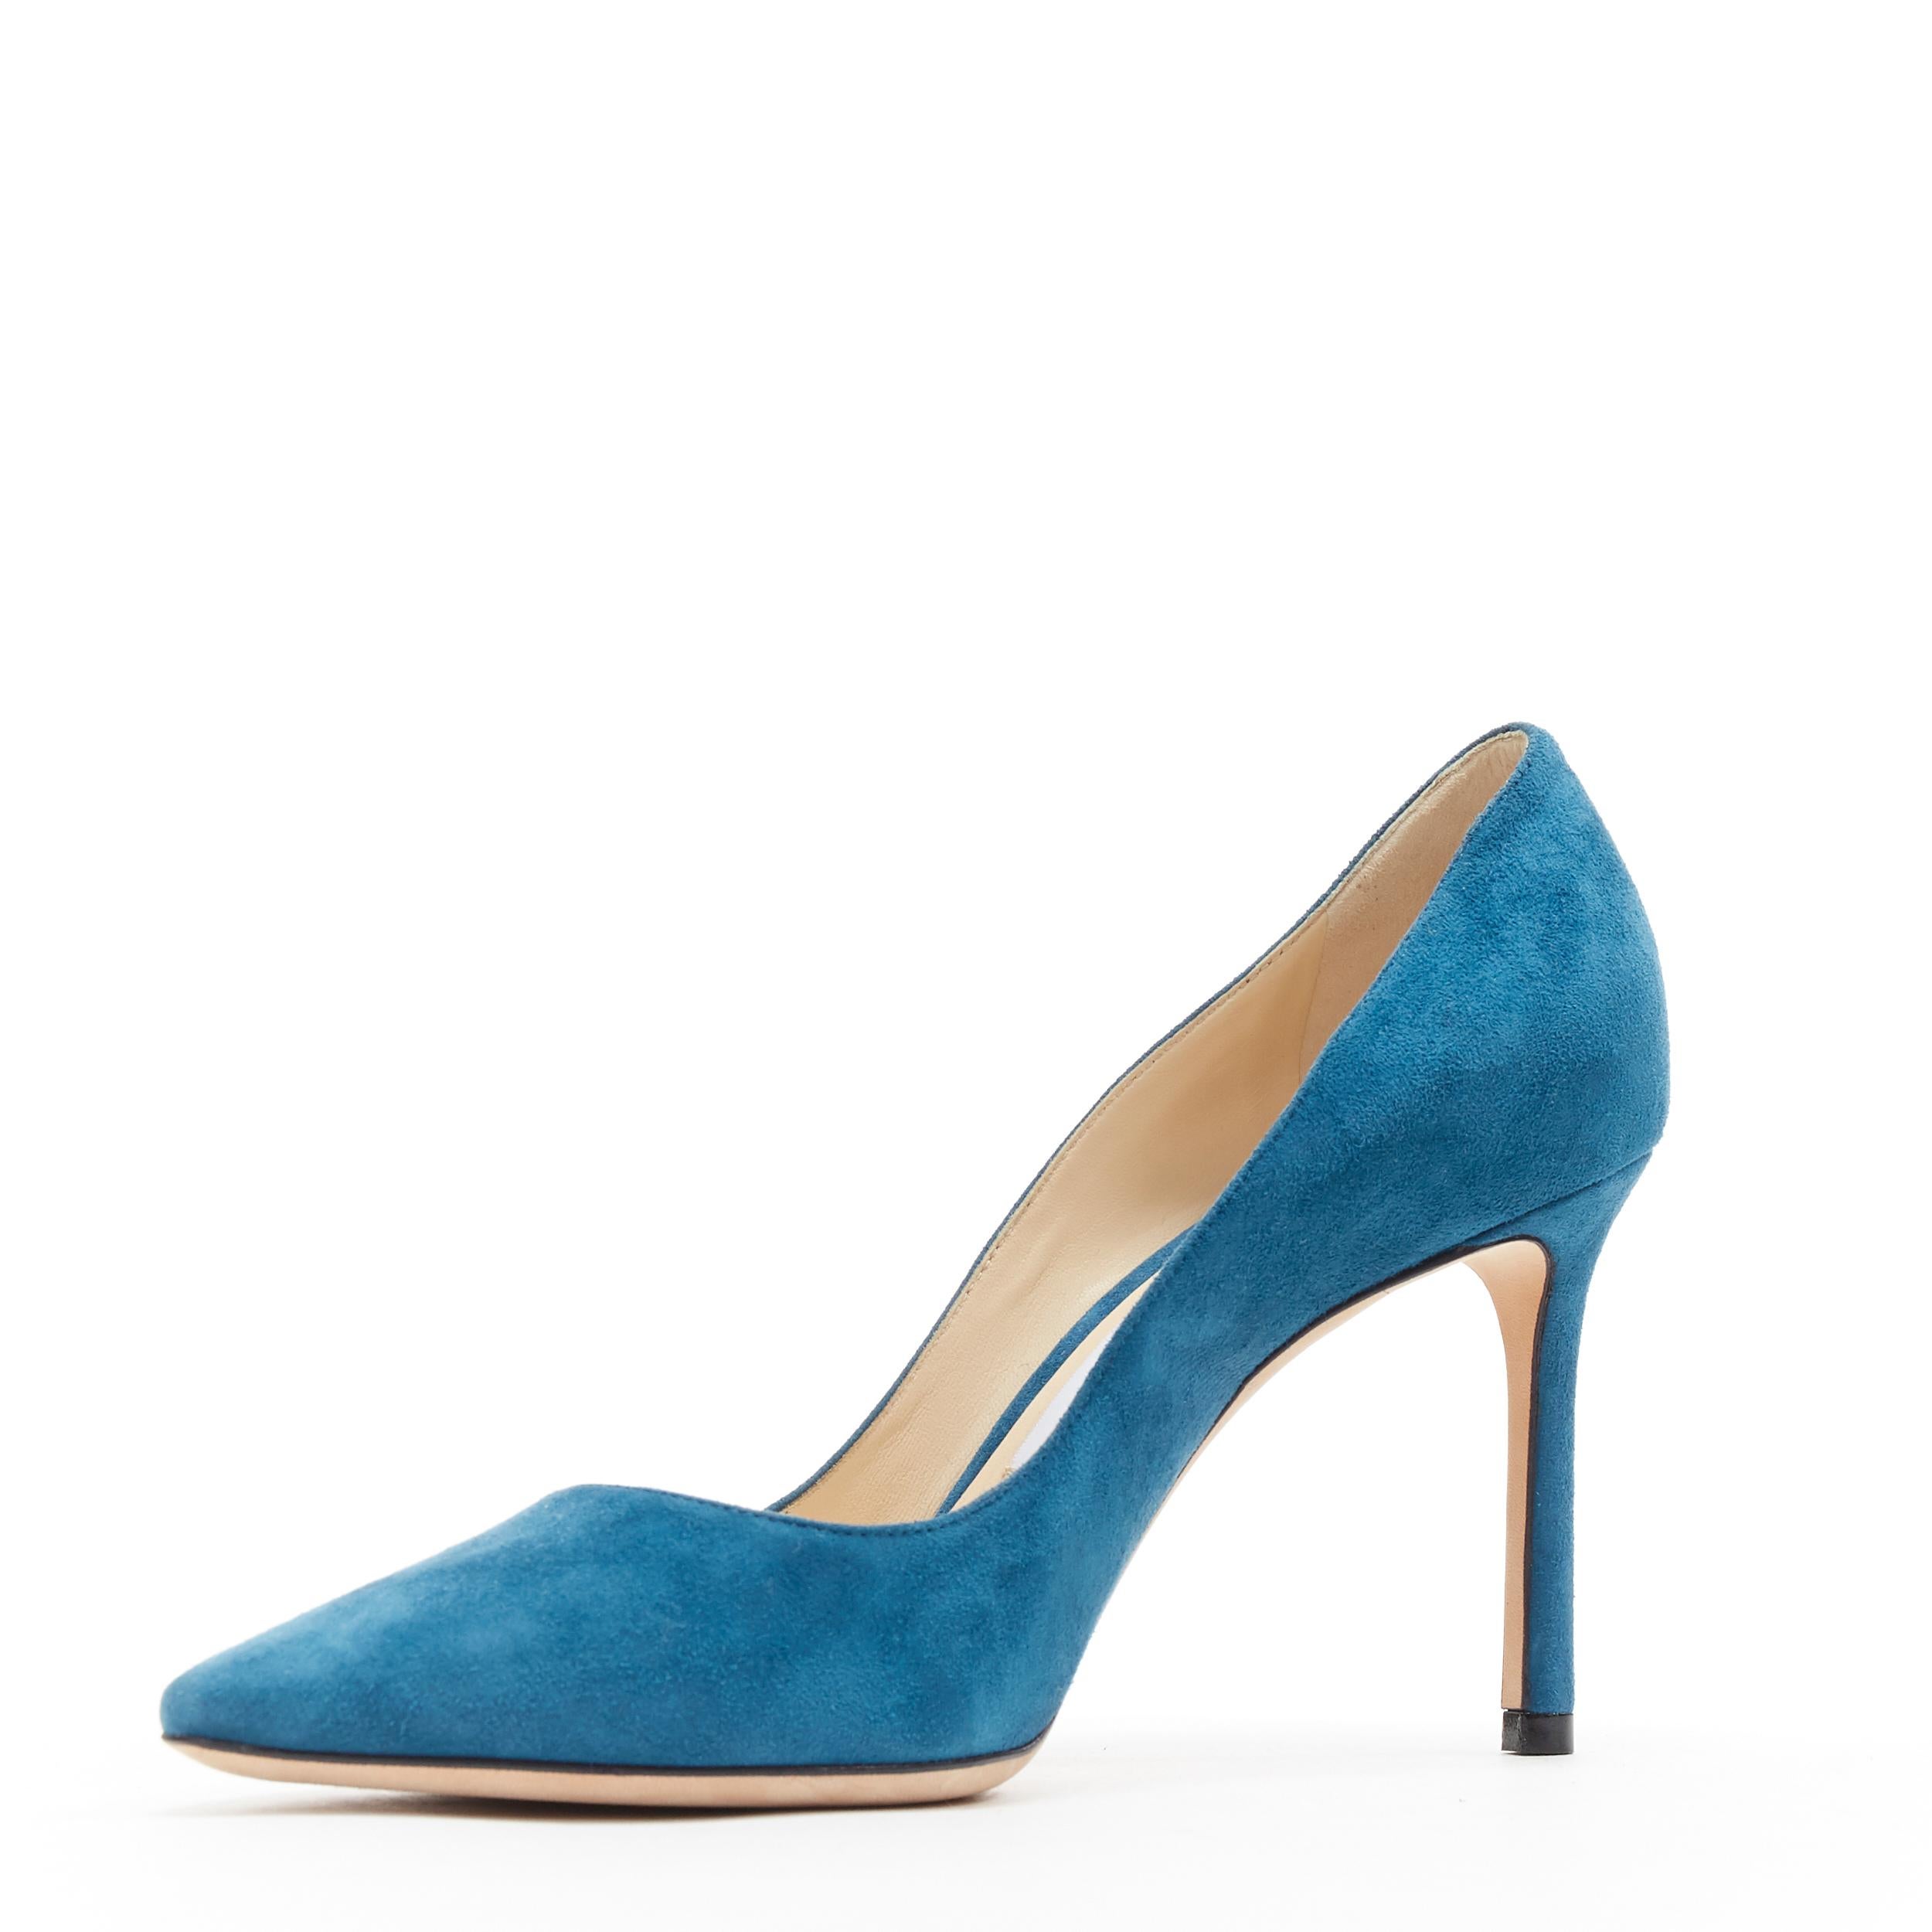 Blue JIMMY CHOO Romy 85 teal blue suede leather point toe pigalle pump EU37